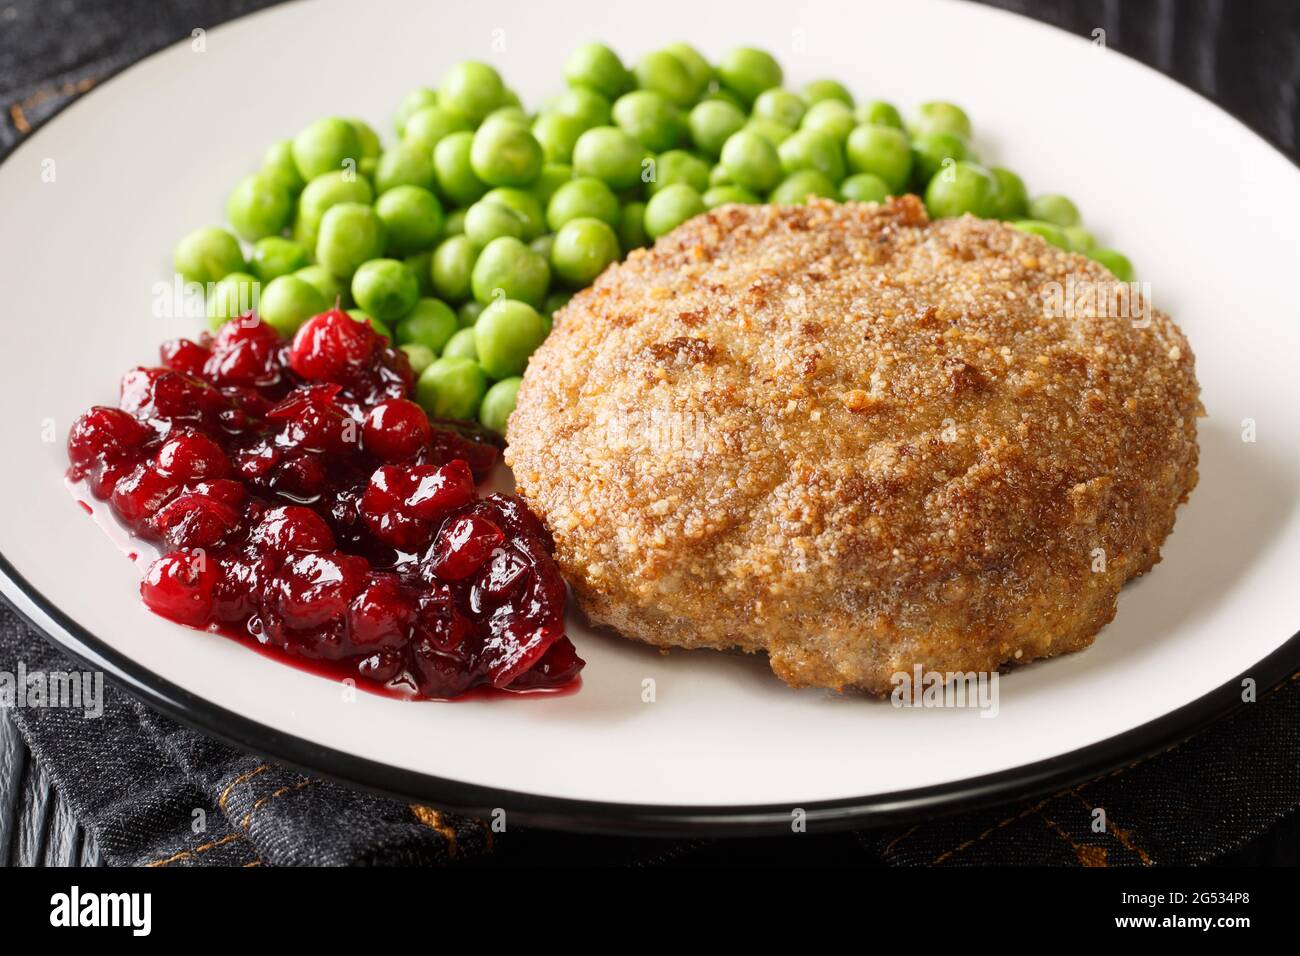 Wallenbergare is a Swedish dish generally consisting of ground veal is traditionally served with boiled green peas closeup in the plate on the table. Stock Photo